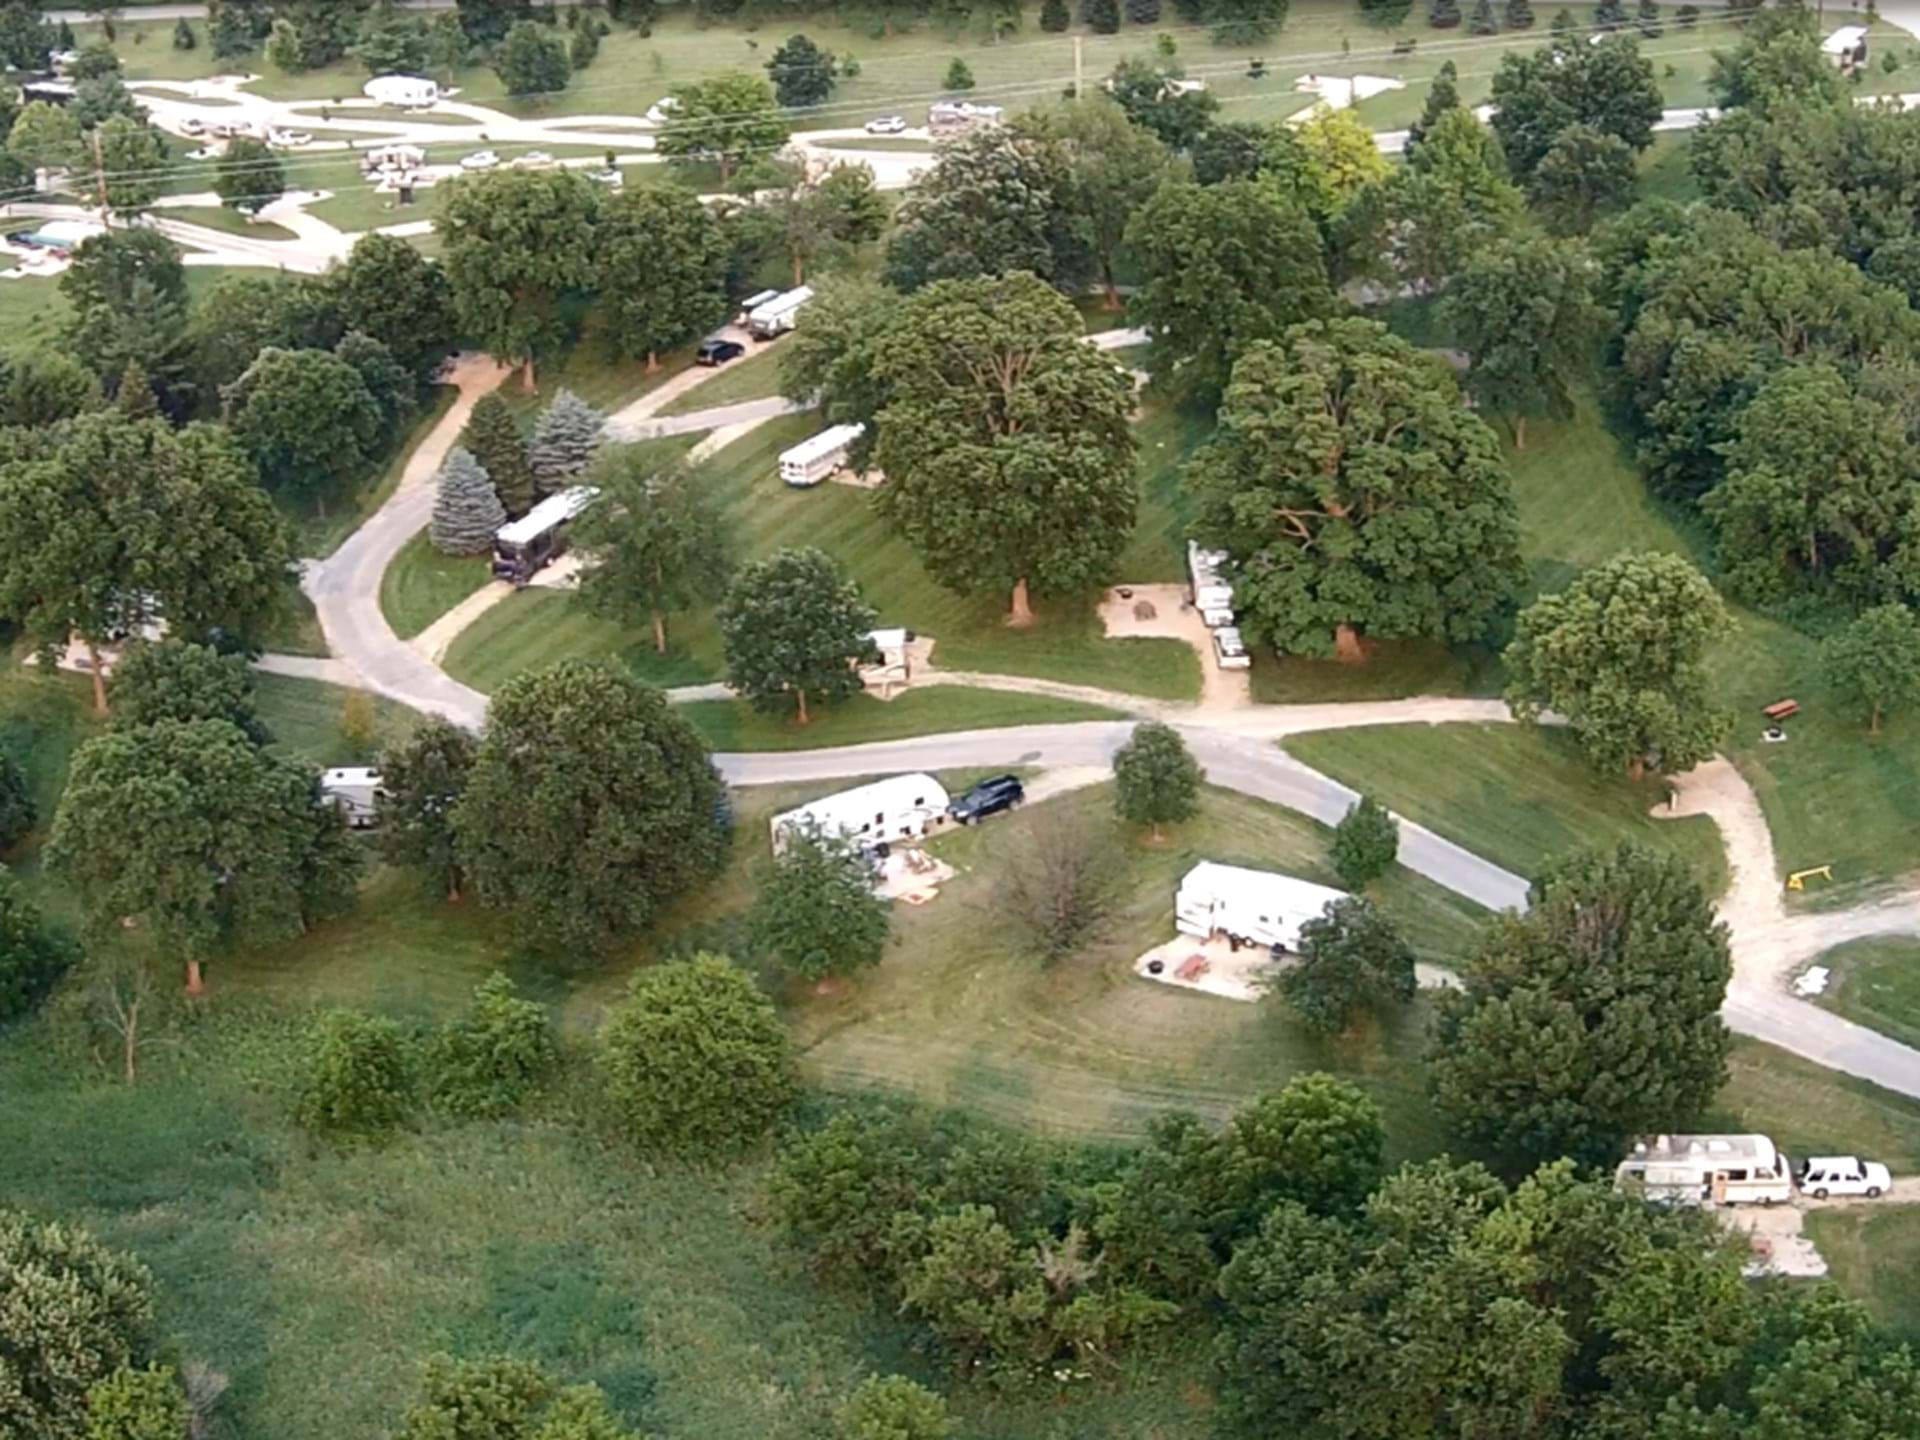 Camping is a popular activity within Wanatee Park